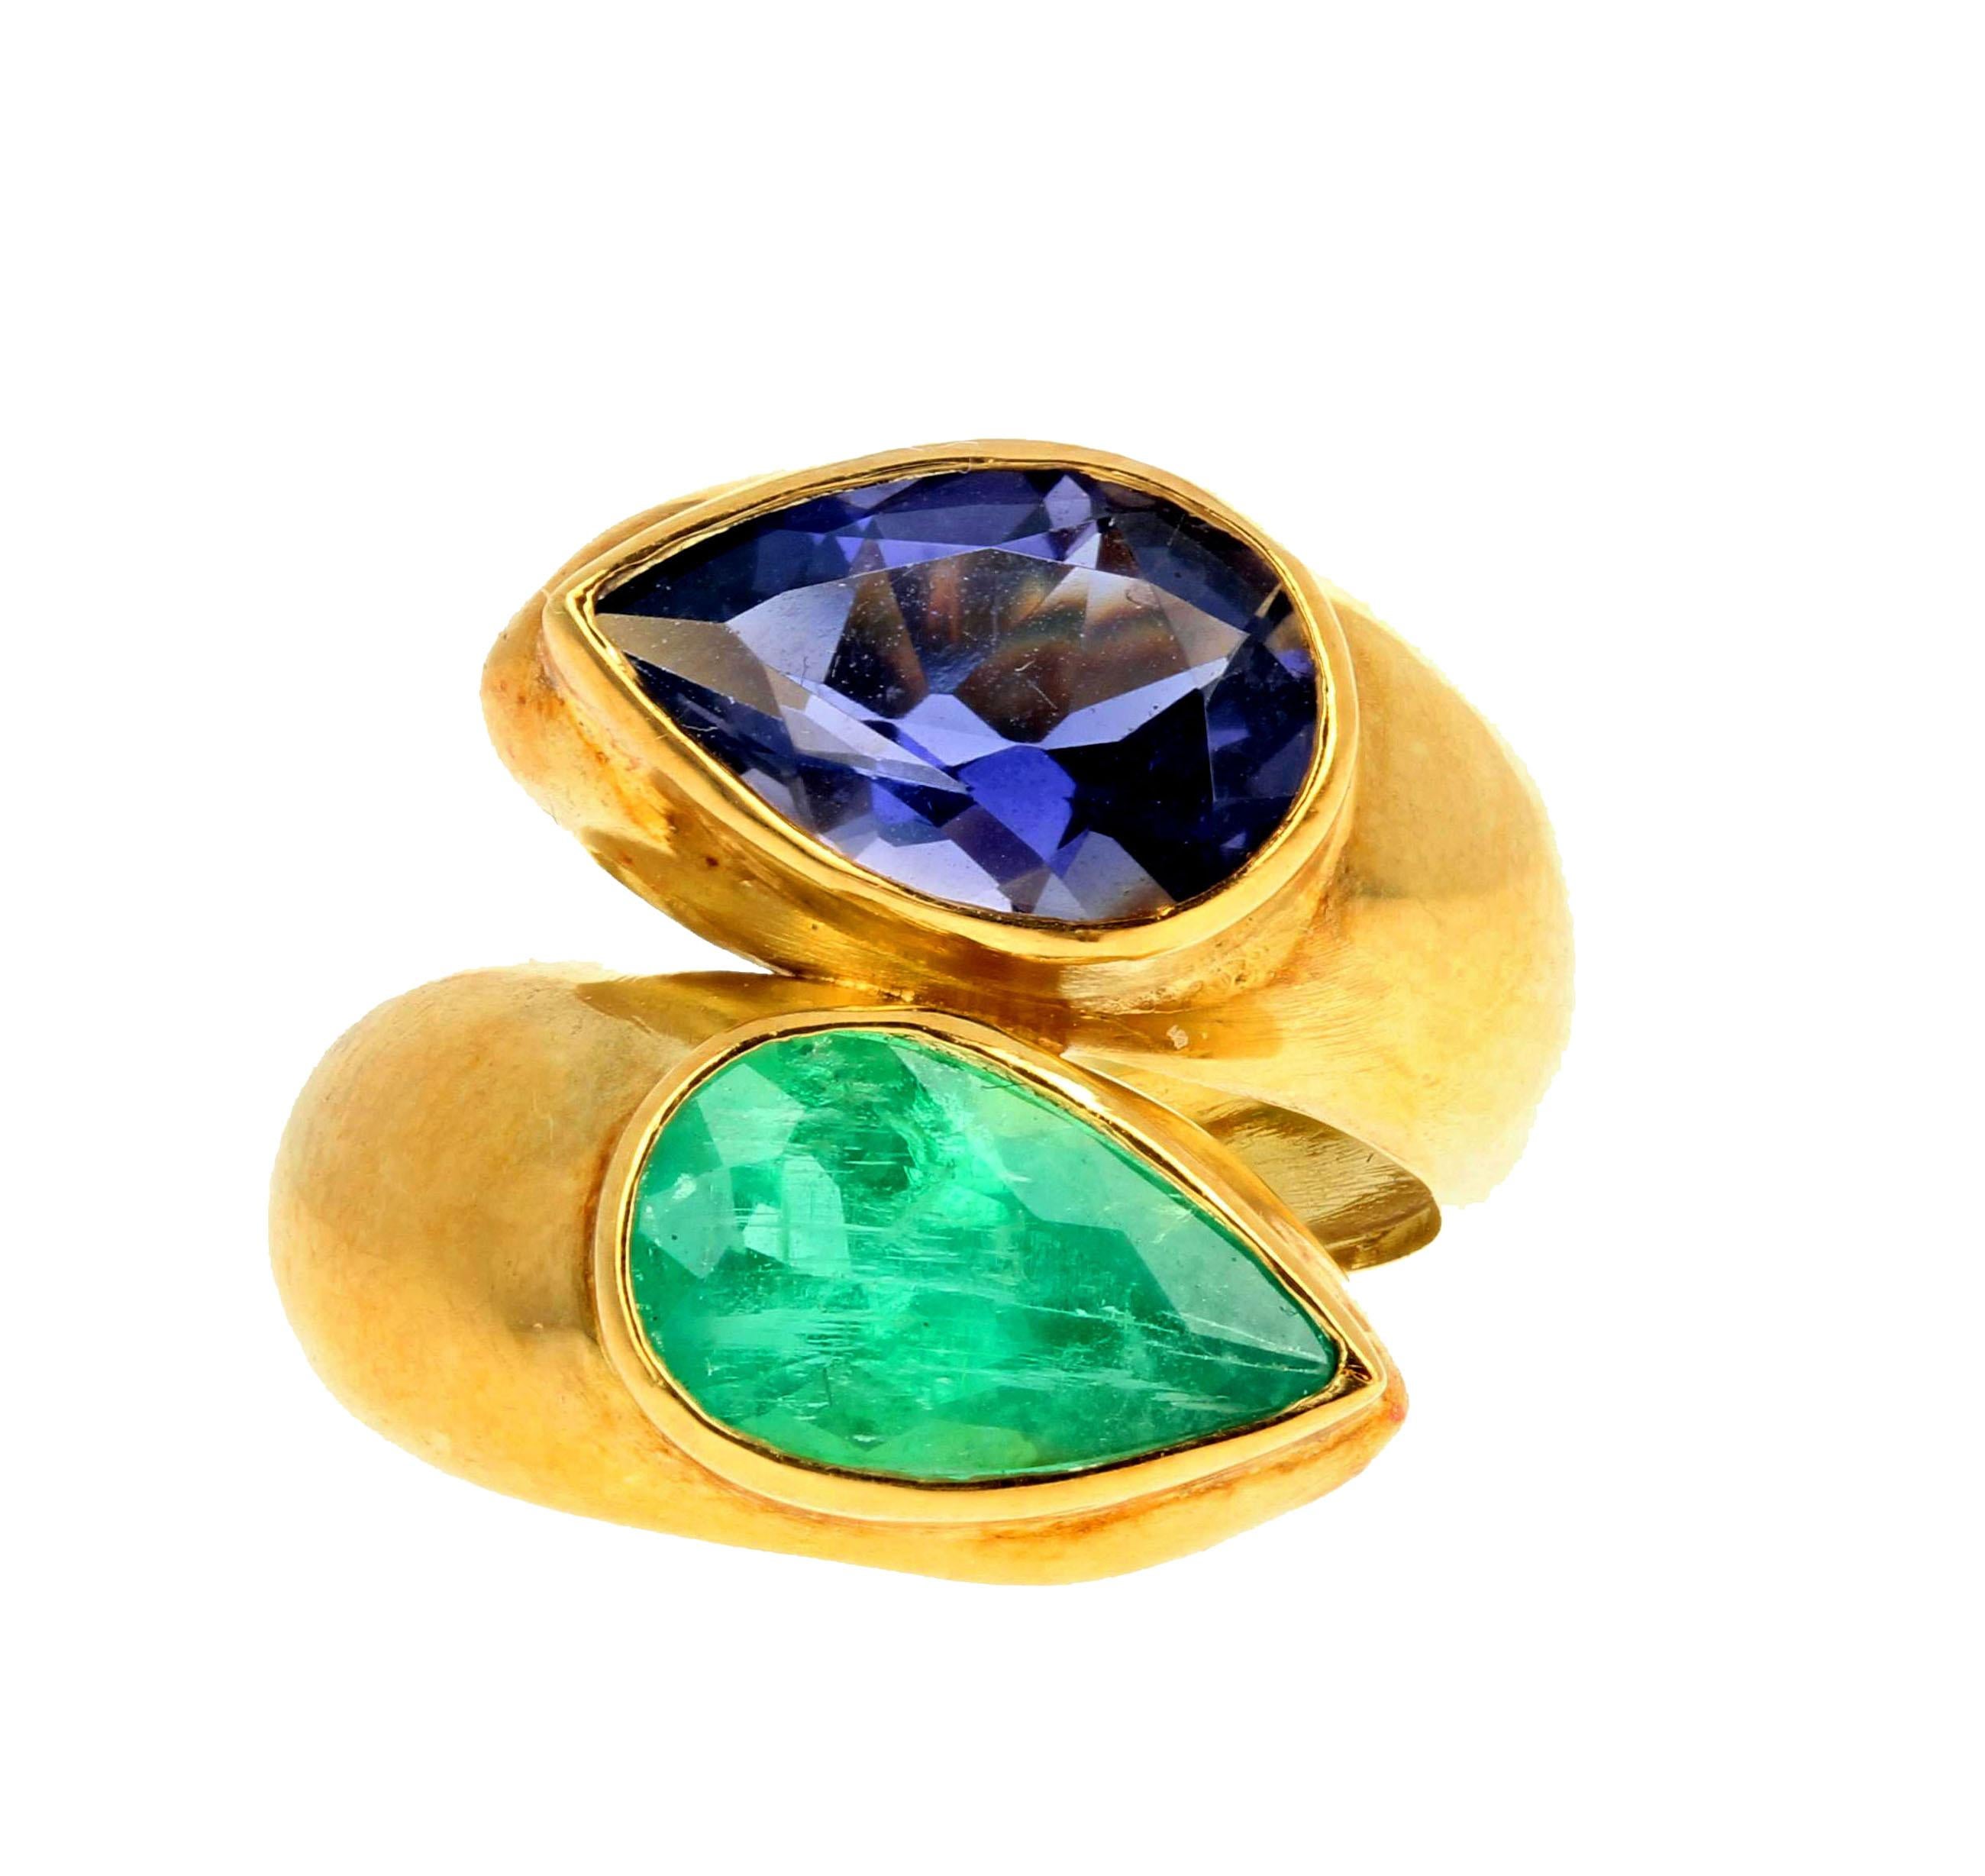 The 2 Carat Emerald 18Kt yellow gold ring is a size 7 (sizable).  Swinging natural bright green emeralds dangle 1.5